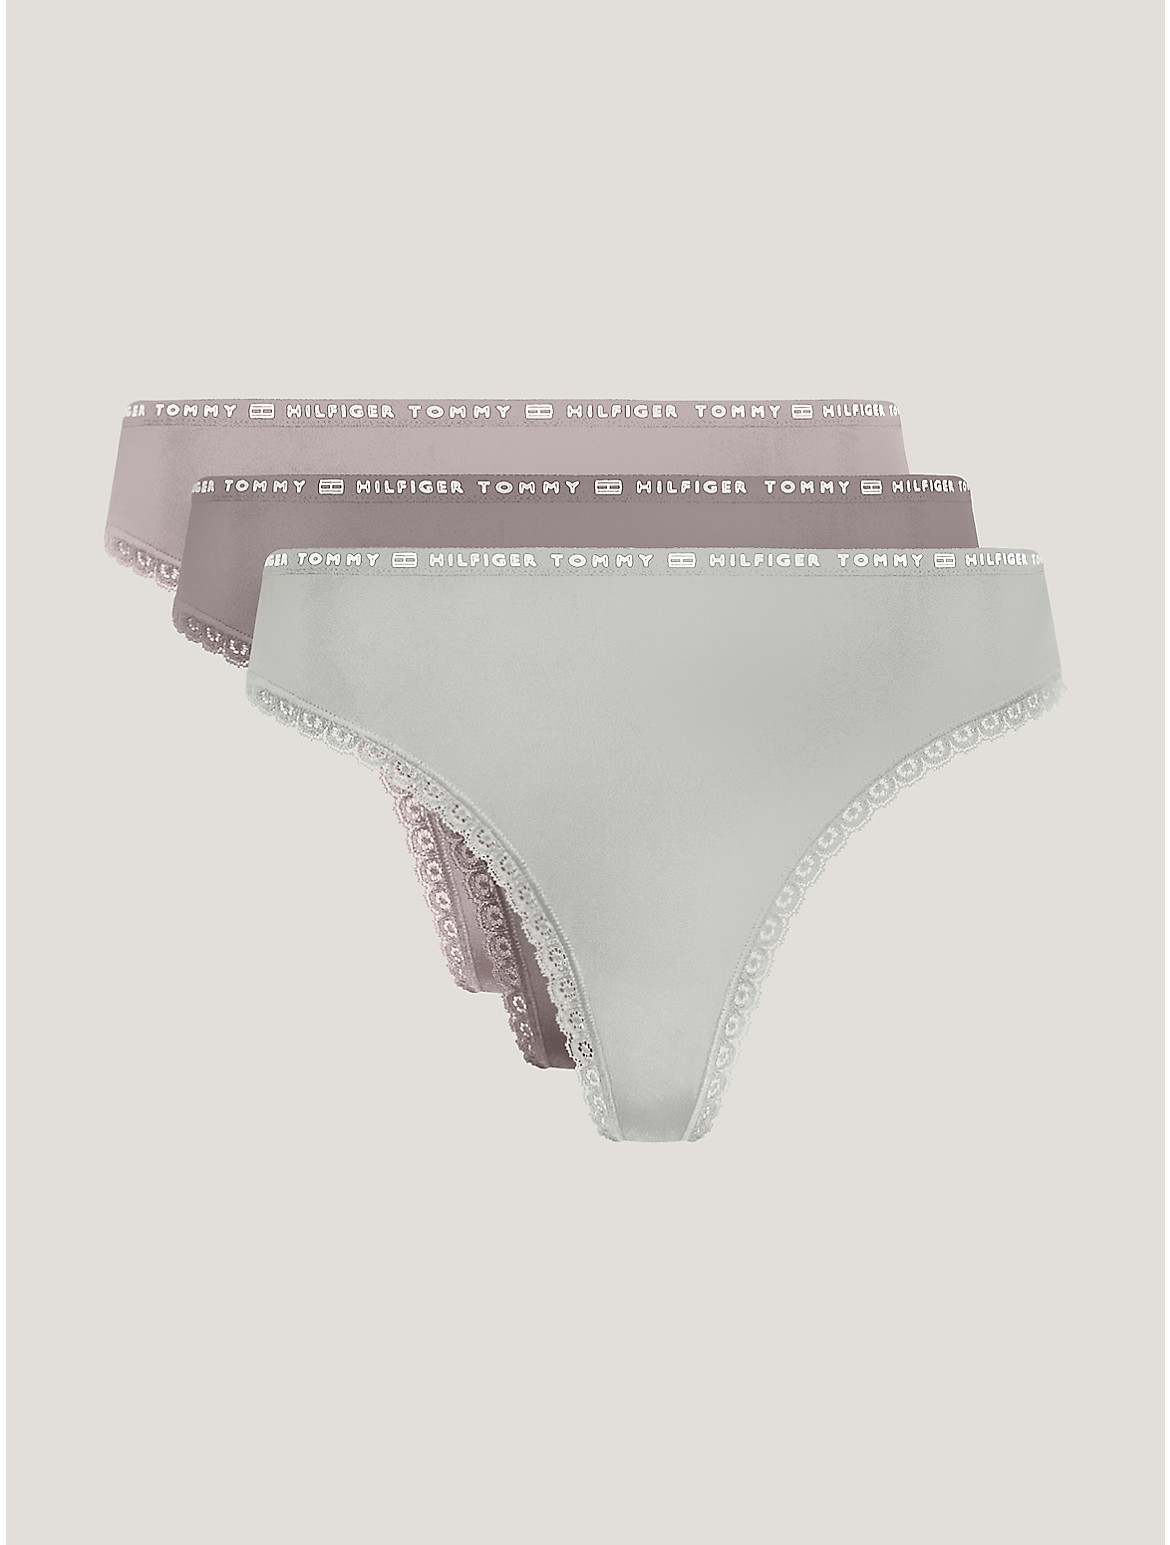 Tommy Hilfiger Women's Logo Lace Thong 3-Pack